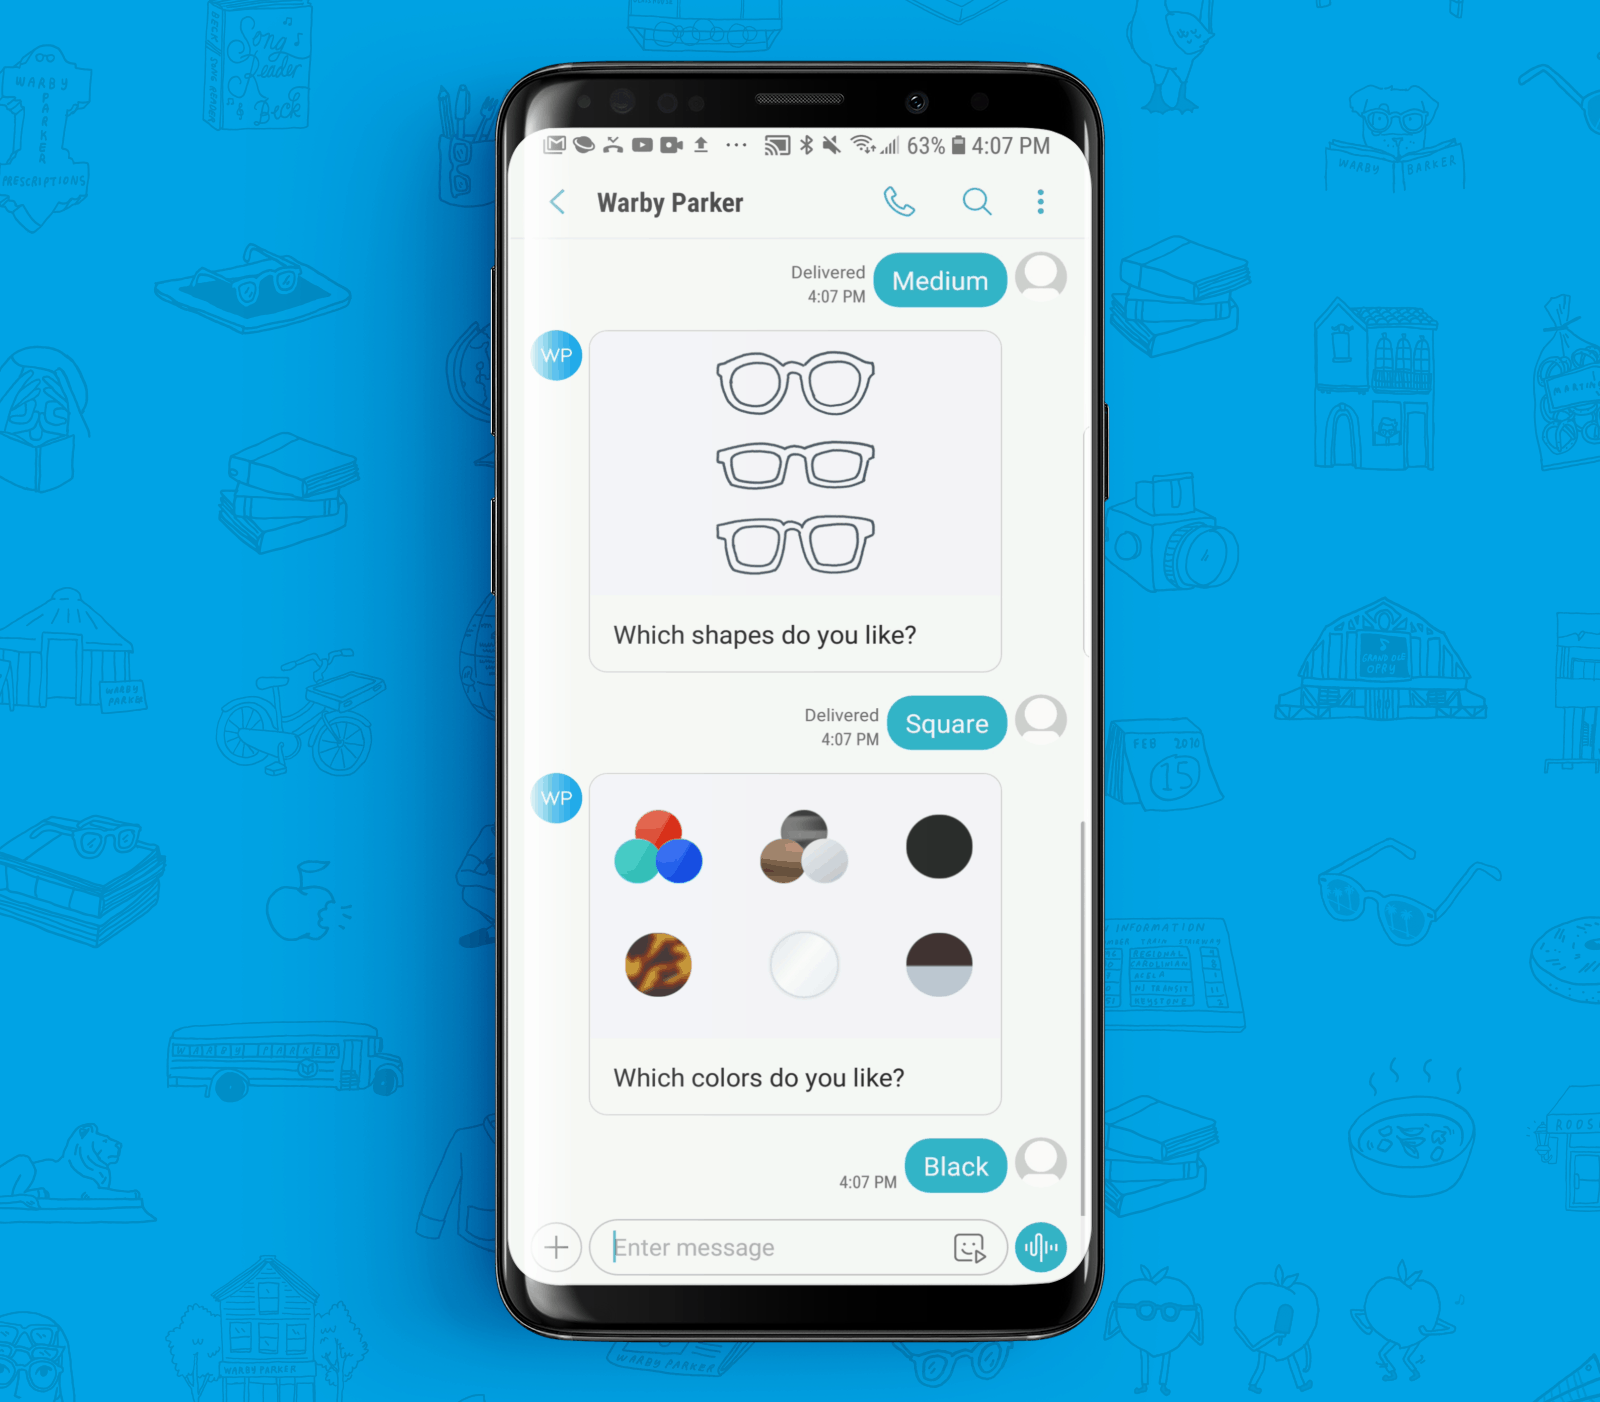 RCS Business Messaging Example from Warby Parker 4